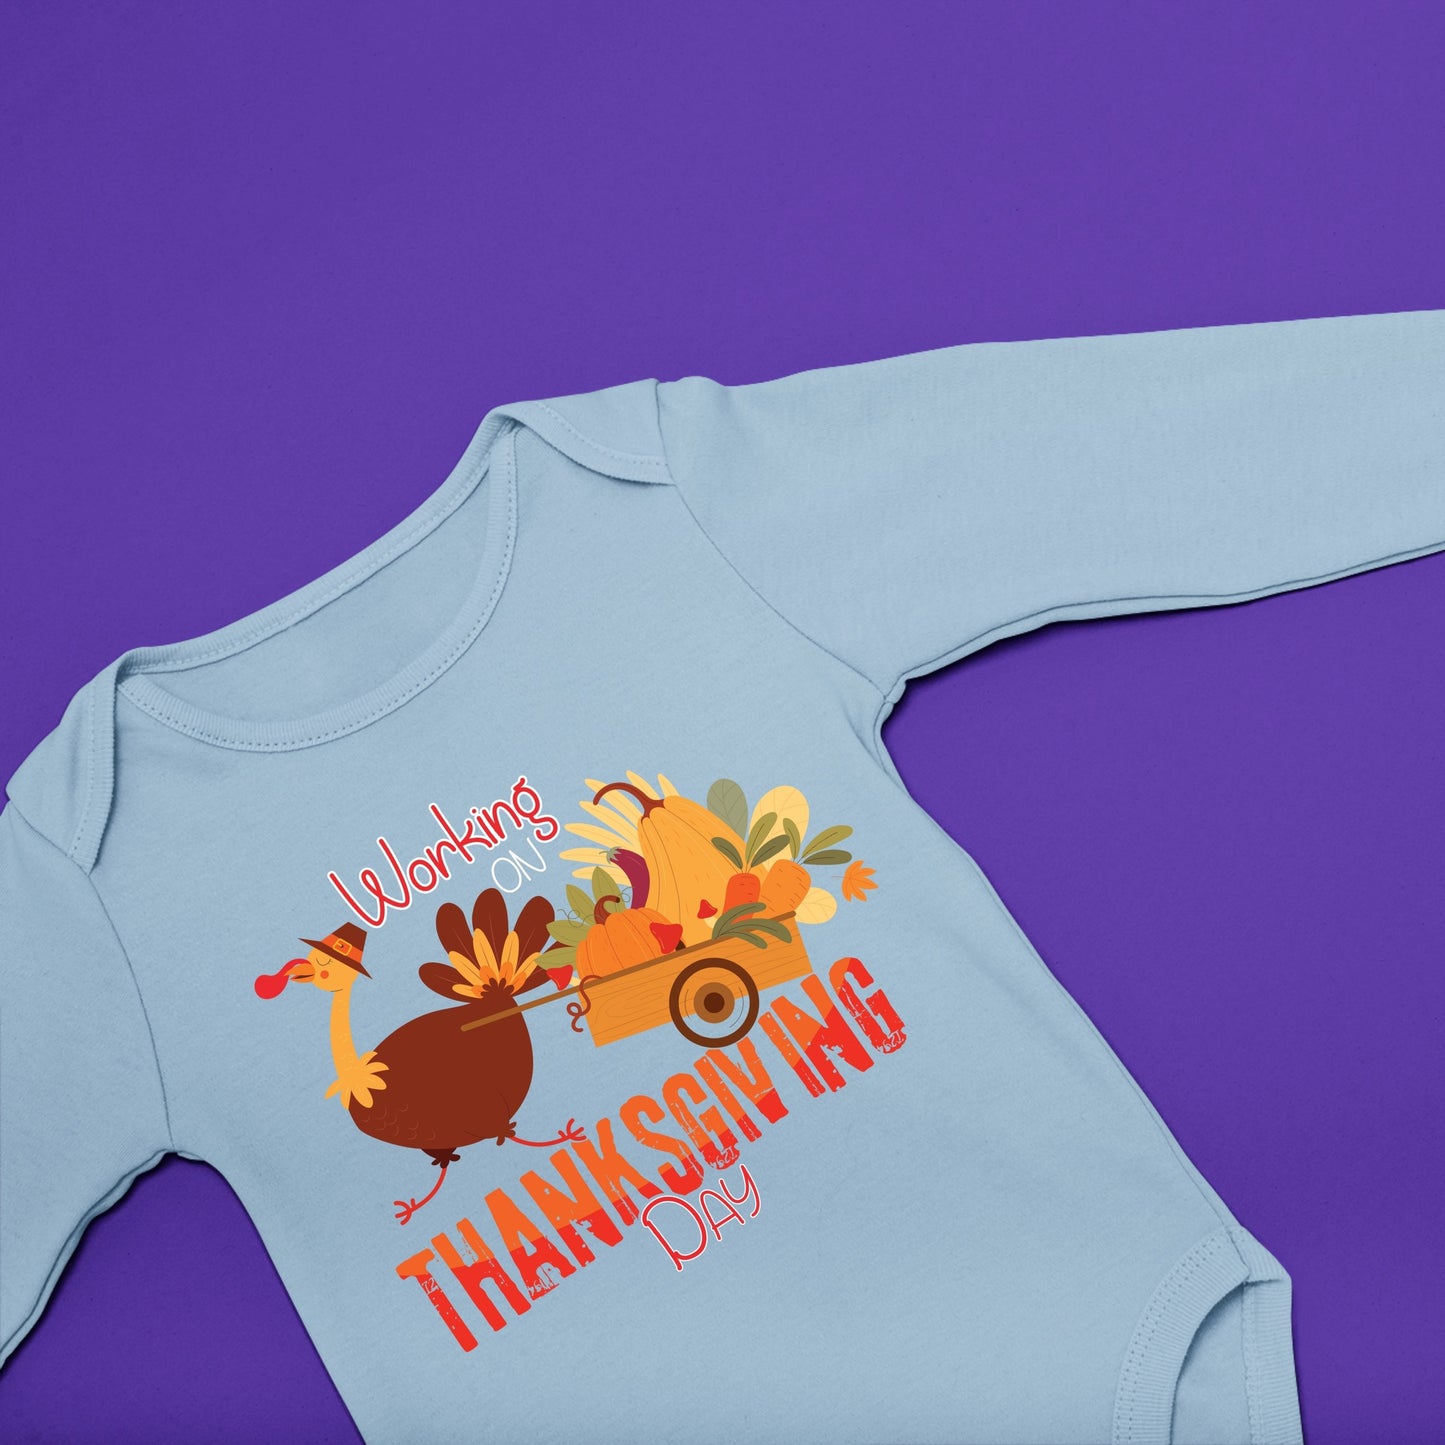 Working on Thanksgiving Day Bodysuit, Thanksgiving Bodysuit, Thanksgiving Bodysuit for Kid, Thanksgiving Gift, Cute Thanksgiving